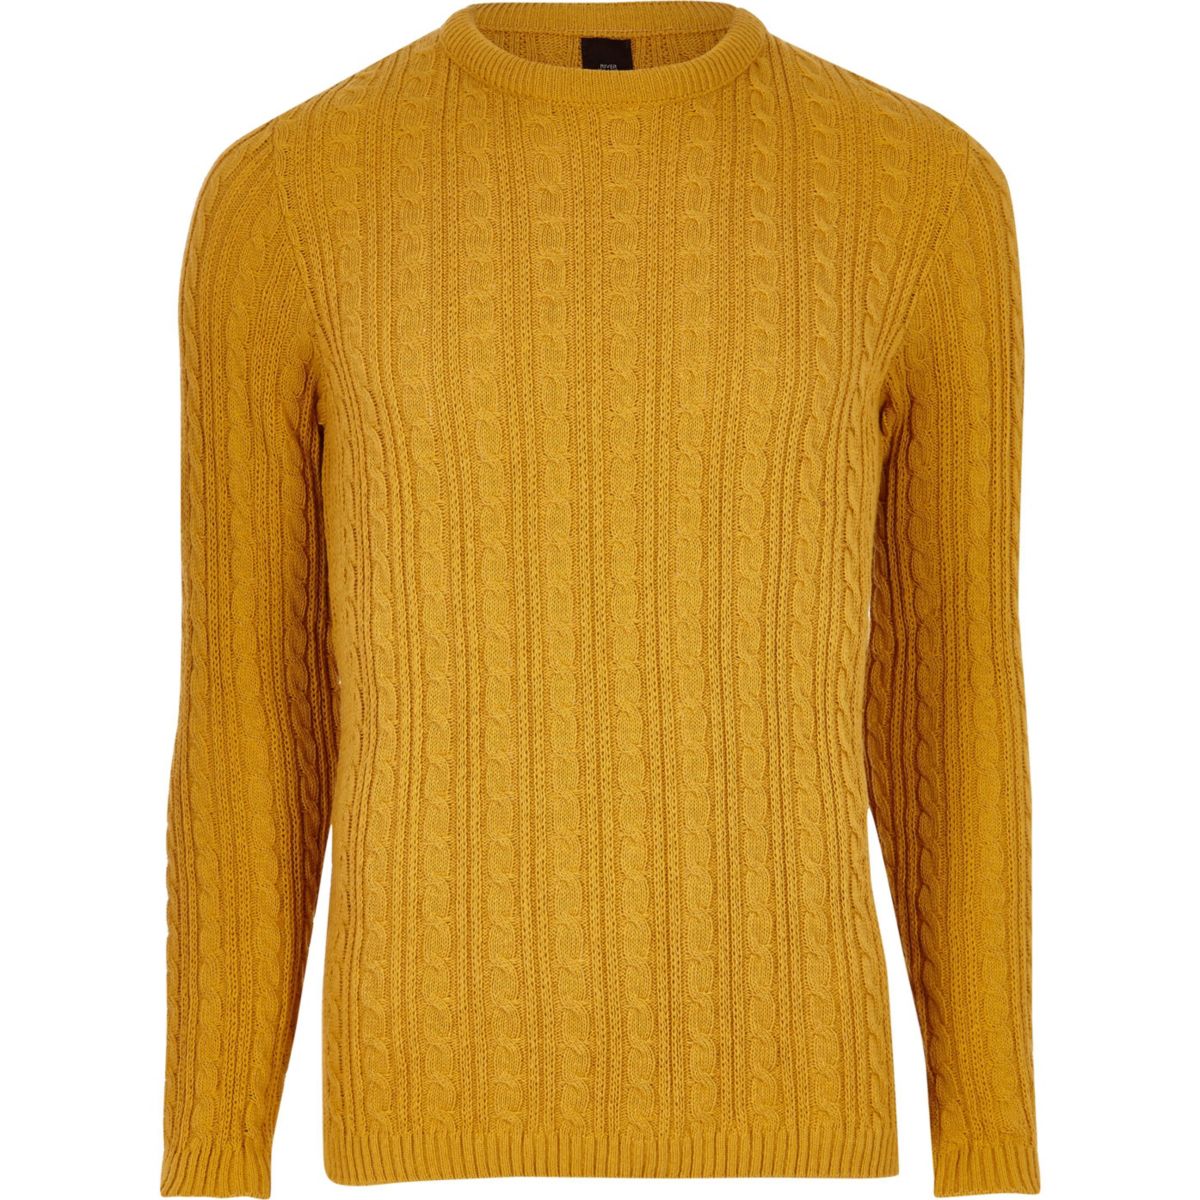 Mustard yellow cable knit muscle fit sweater - Sweaters - Sweaters ...